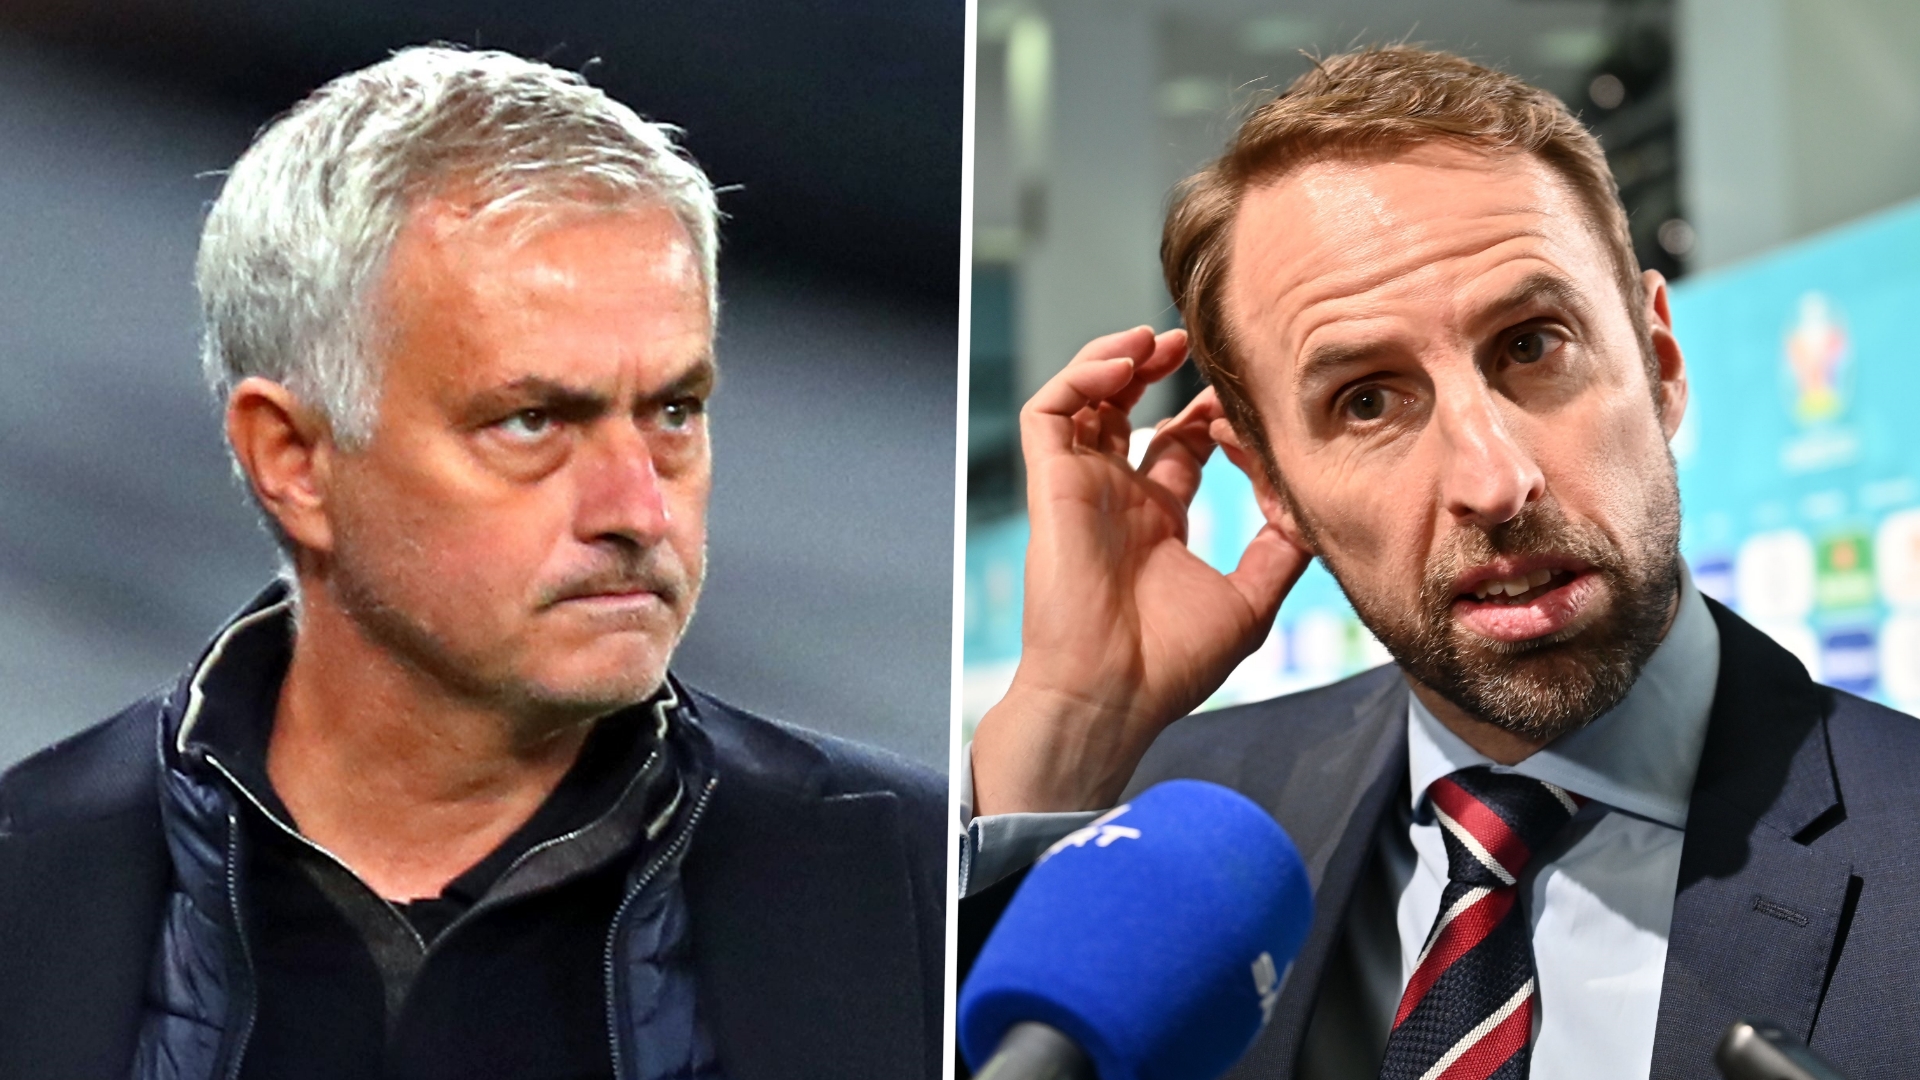 'I don't understand' - Southgate responds to reports of Mourinho rift over Kane fitness